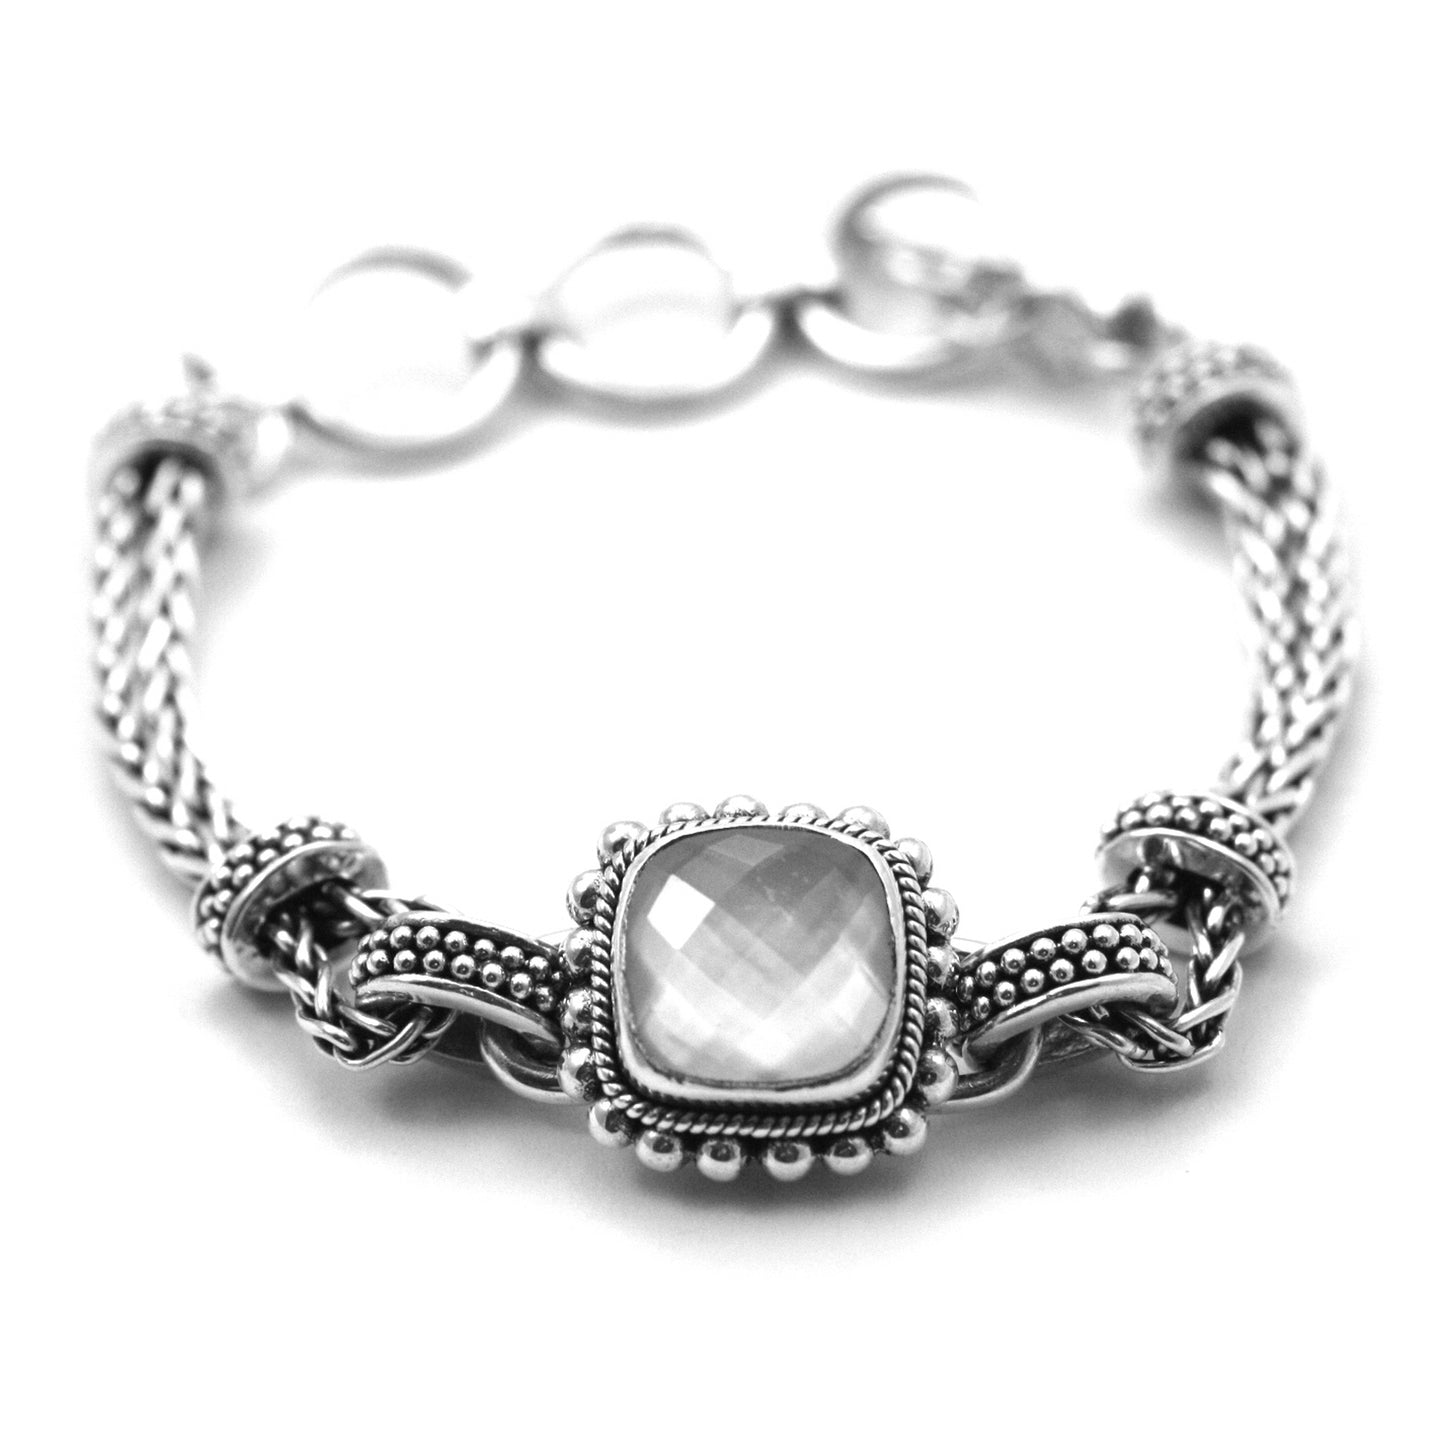 B215MPF PADMA .925 Sterling Silver Bracelet with a Mother of Pearl Doublet Gemstone